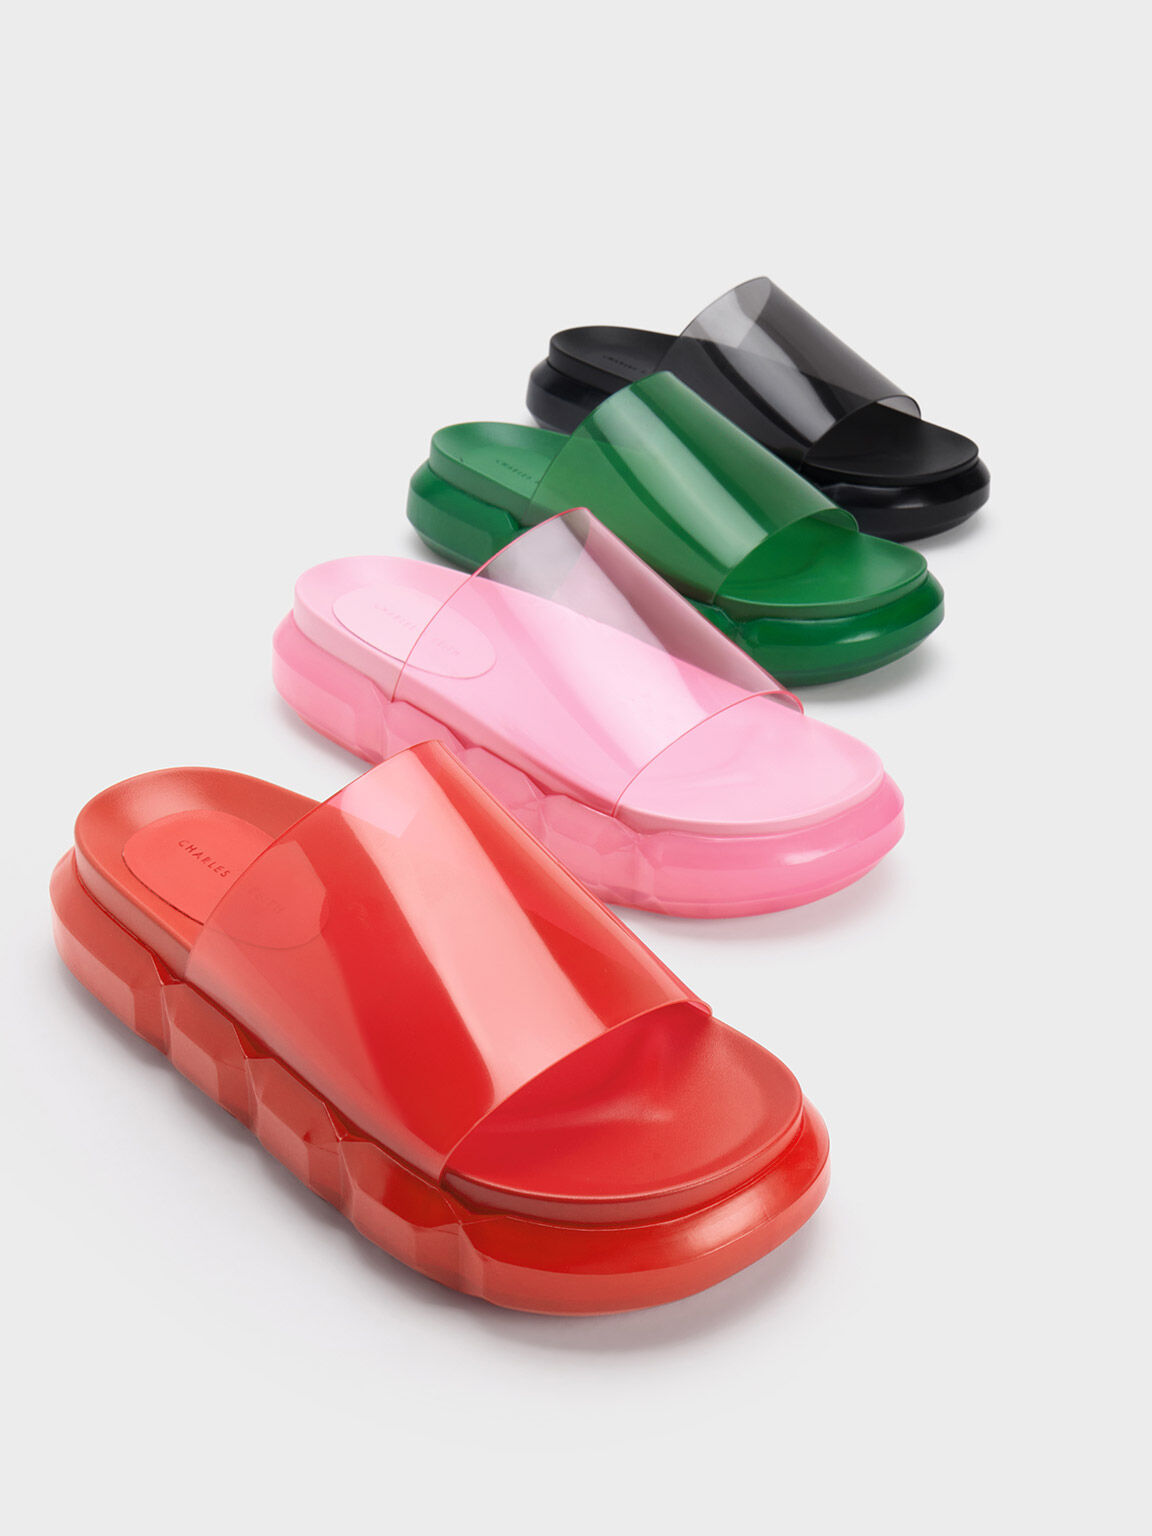 Green Fia See-Through Slide Sandals - CHARLES & KEITH US